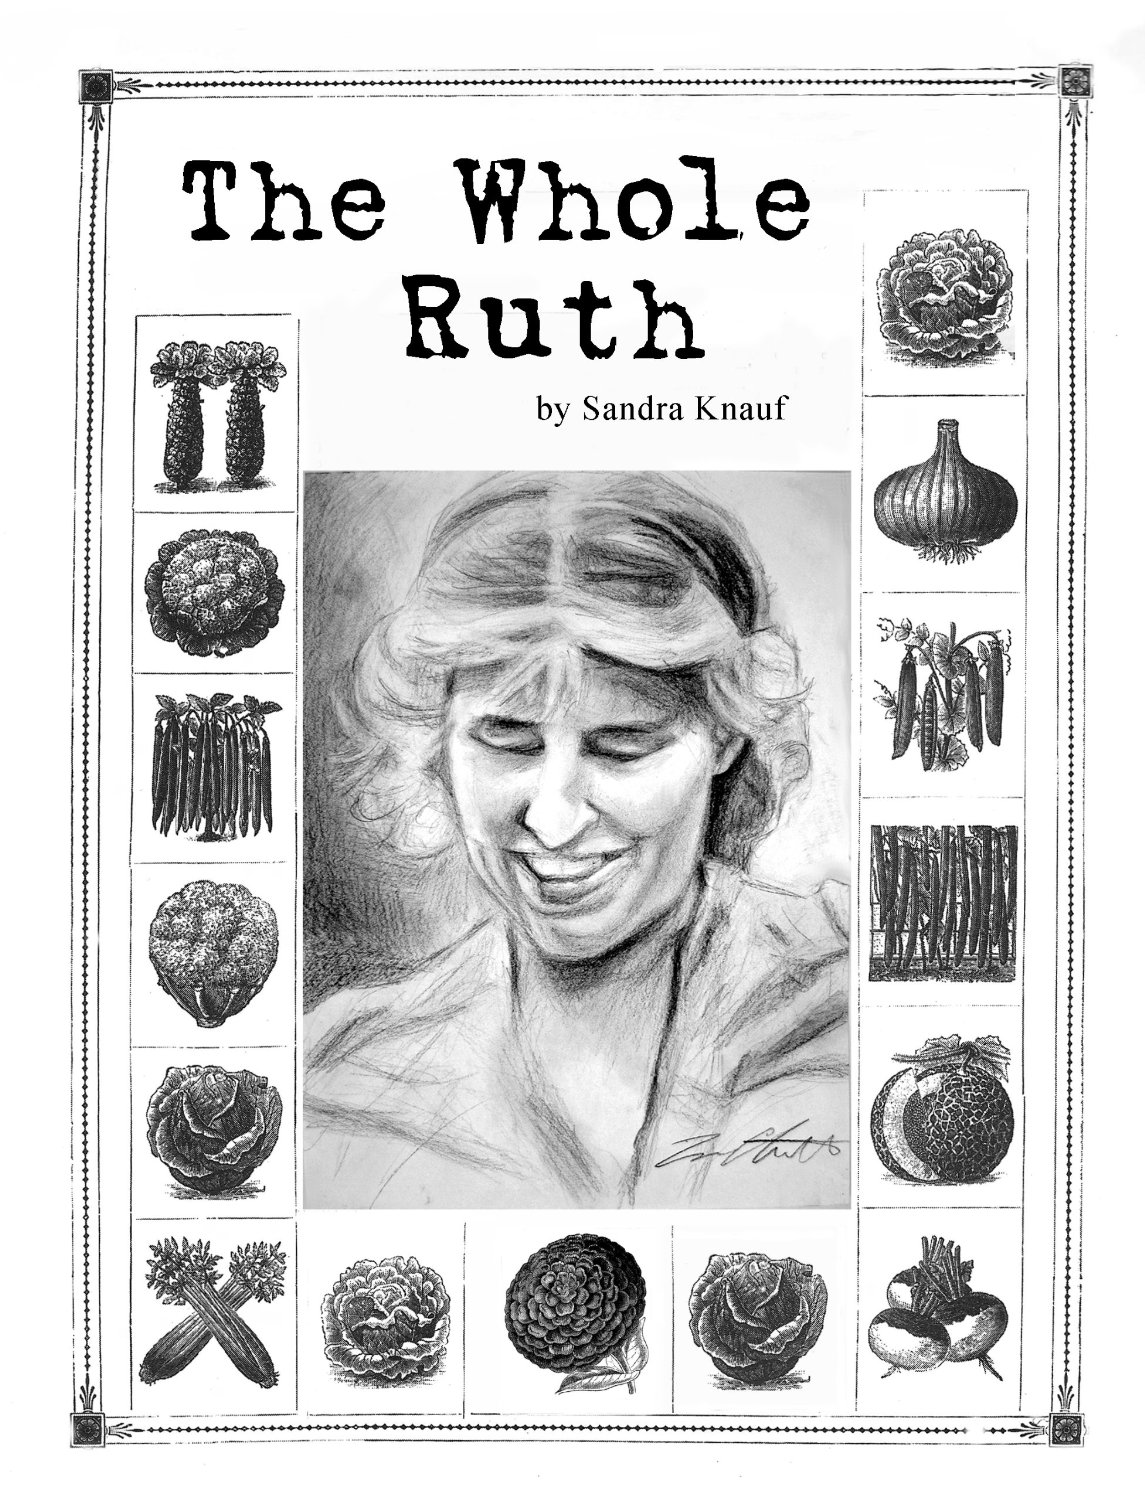 FREE: The Whole Ruth: A Biography of Ruth Stout by Sandra Knauf